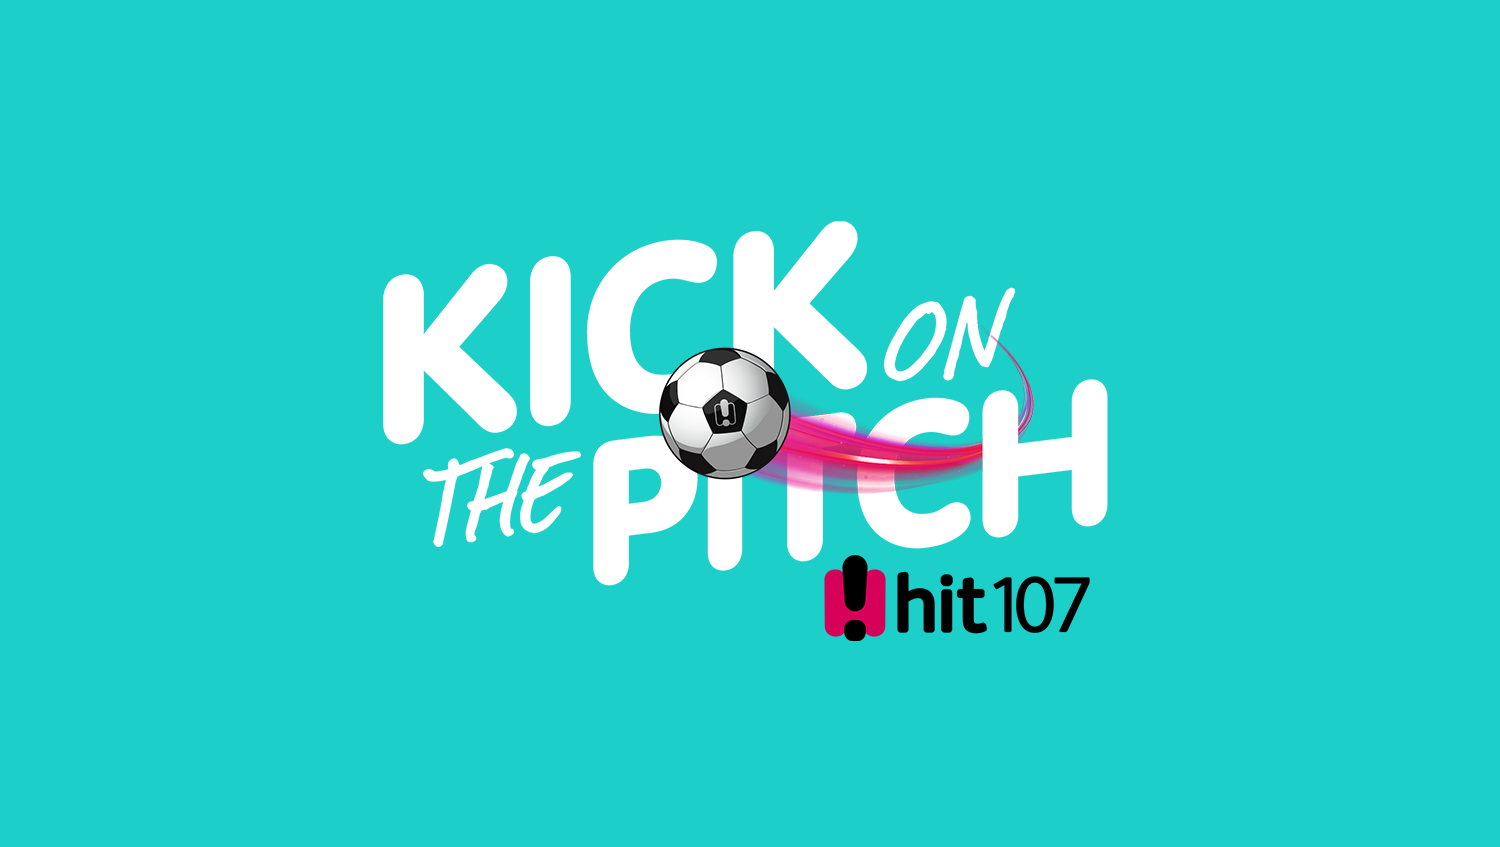 Adelaide United Kick on the Pitch presented by Hit 107